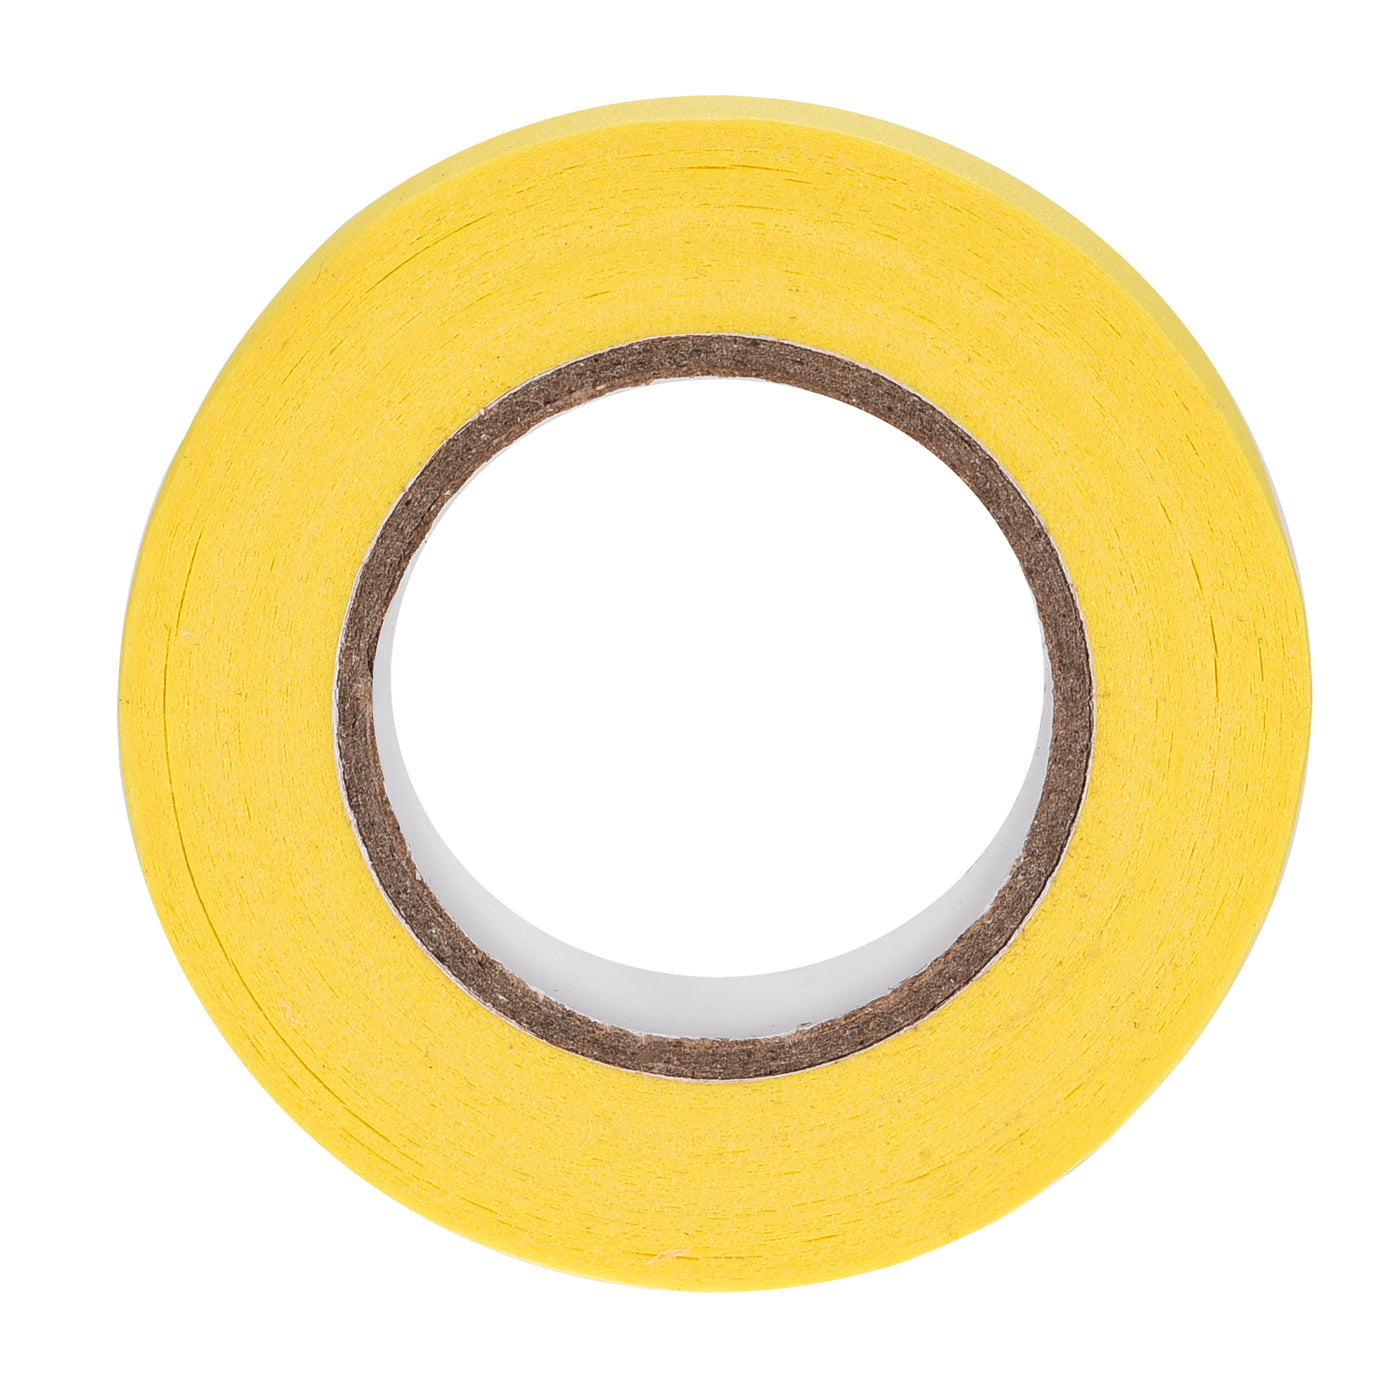 uxcell Uxcell 3Pcs 25mm 1 inch Wide 20m 21 Yards Masking Tape Painters Tape Rolls Yellow